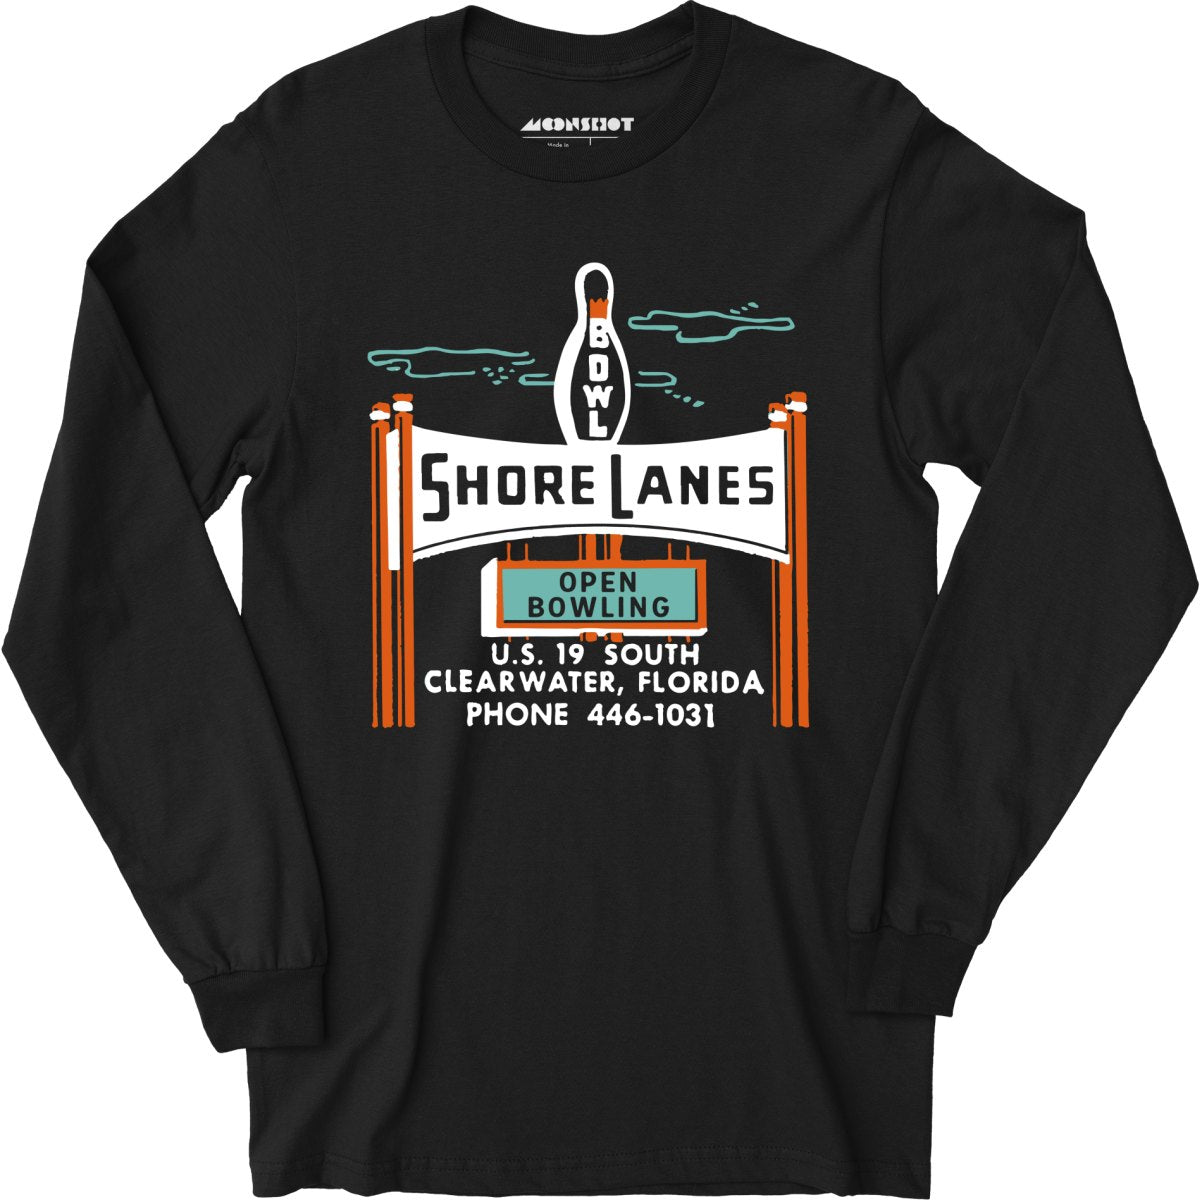 Shore Lanes - Clearwater, FL - Vintage Bowling Alley - Long Sleeve T-Shirt